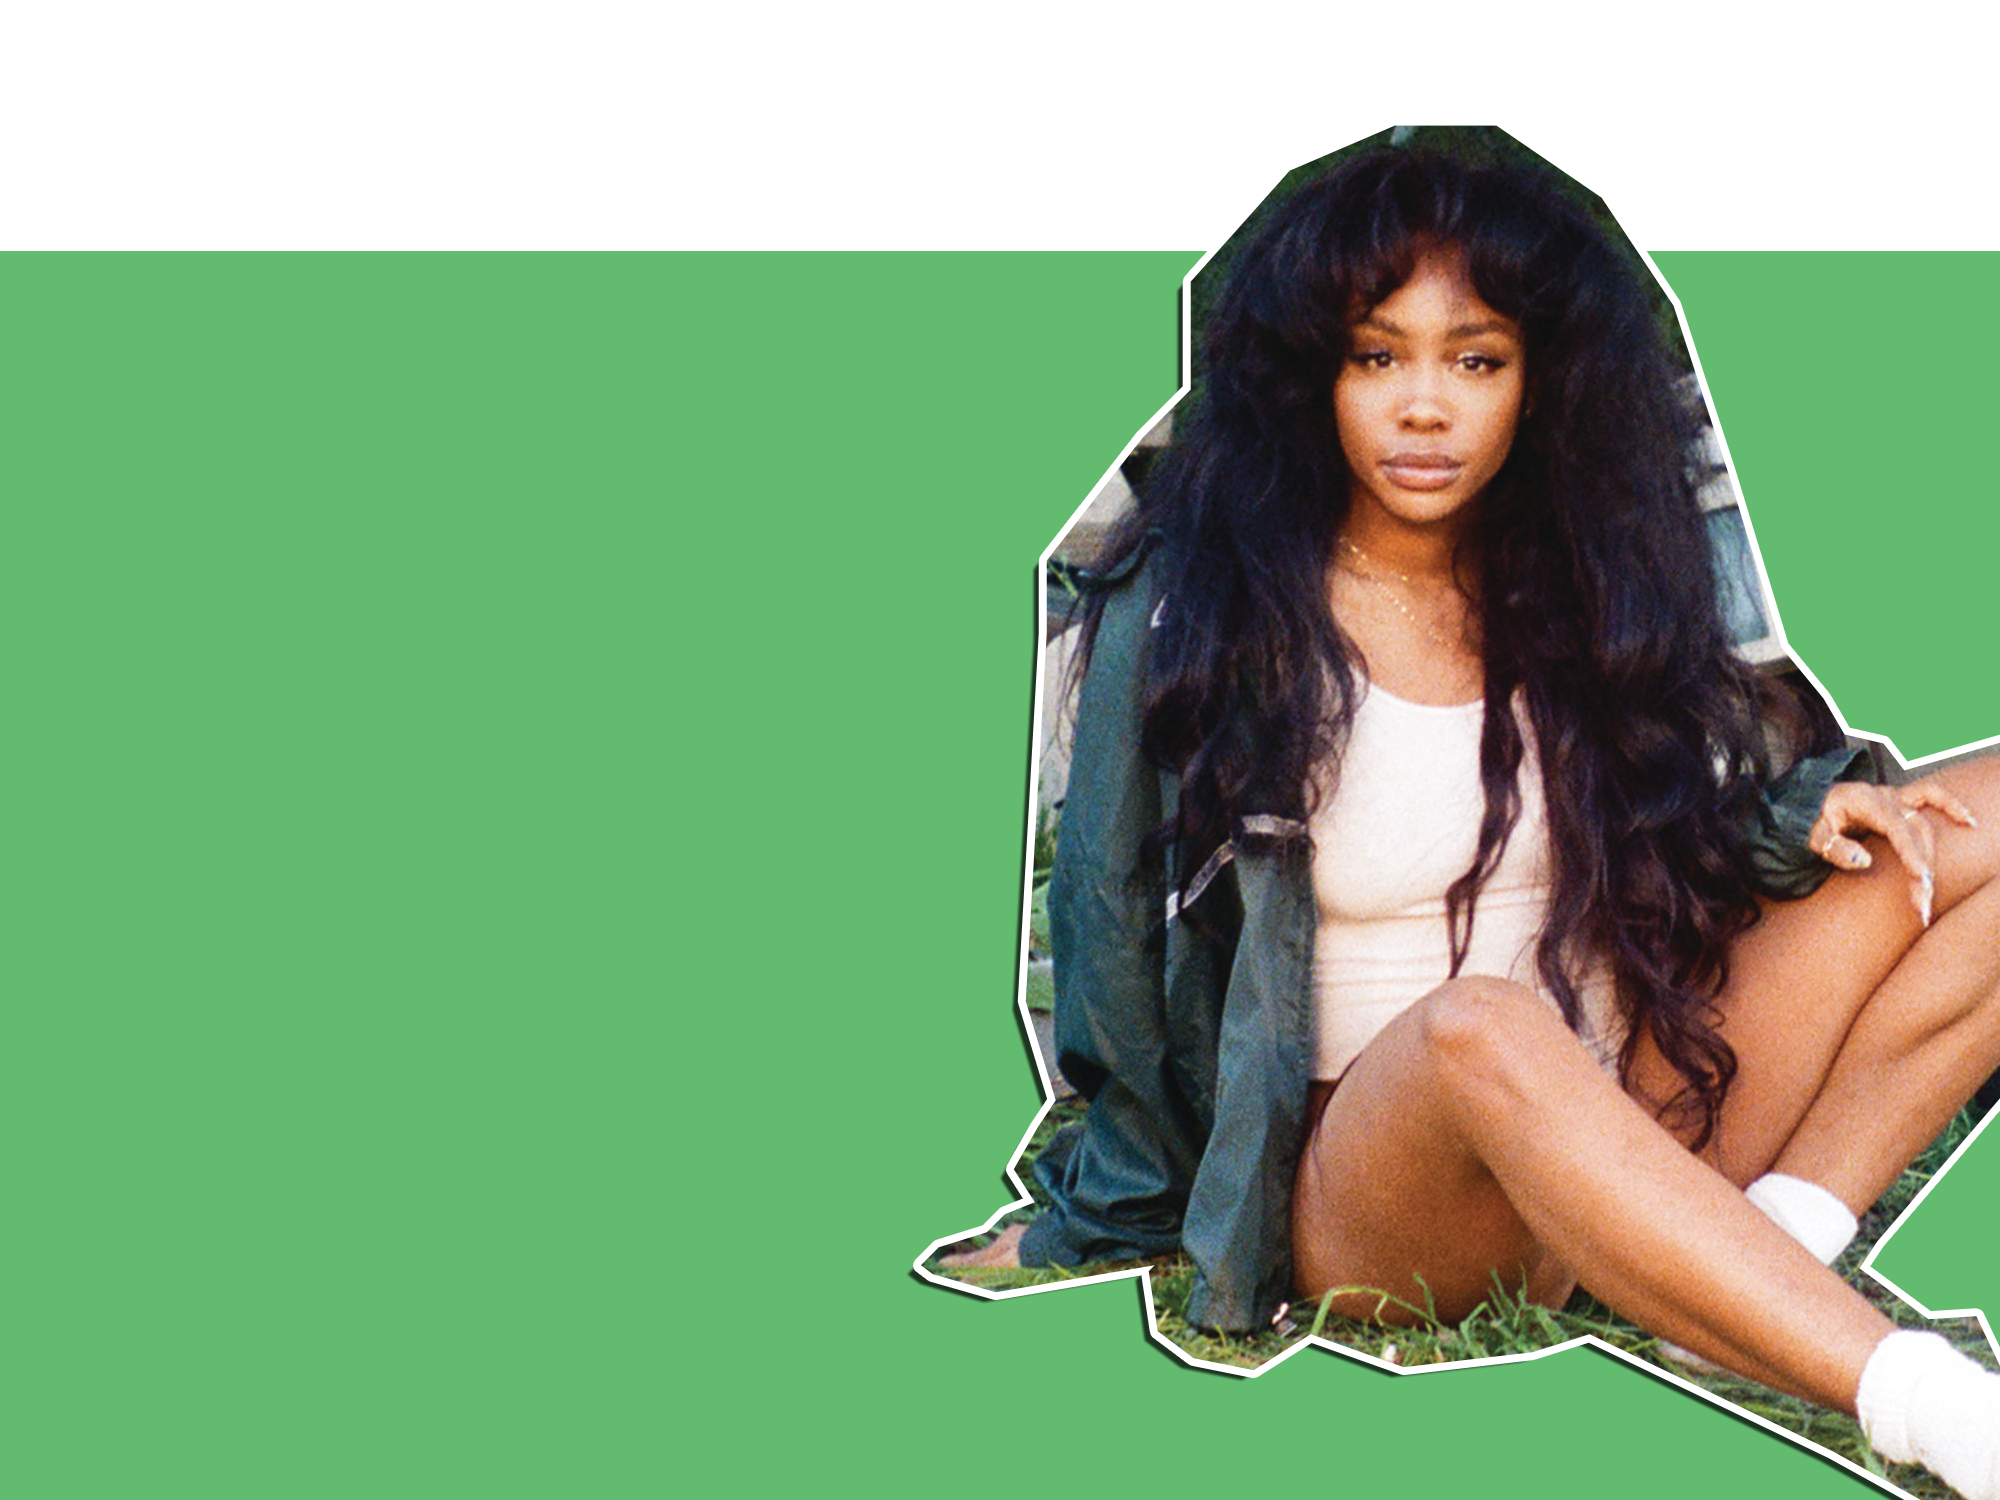 ‘Ctrl’ Review: The Party Isn’t Over for SZA – It’s Just Begun